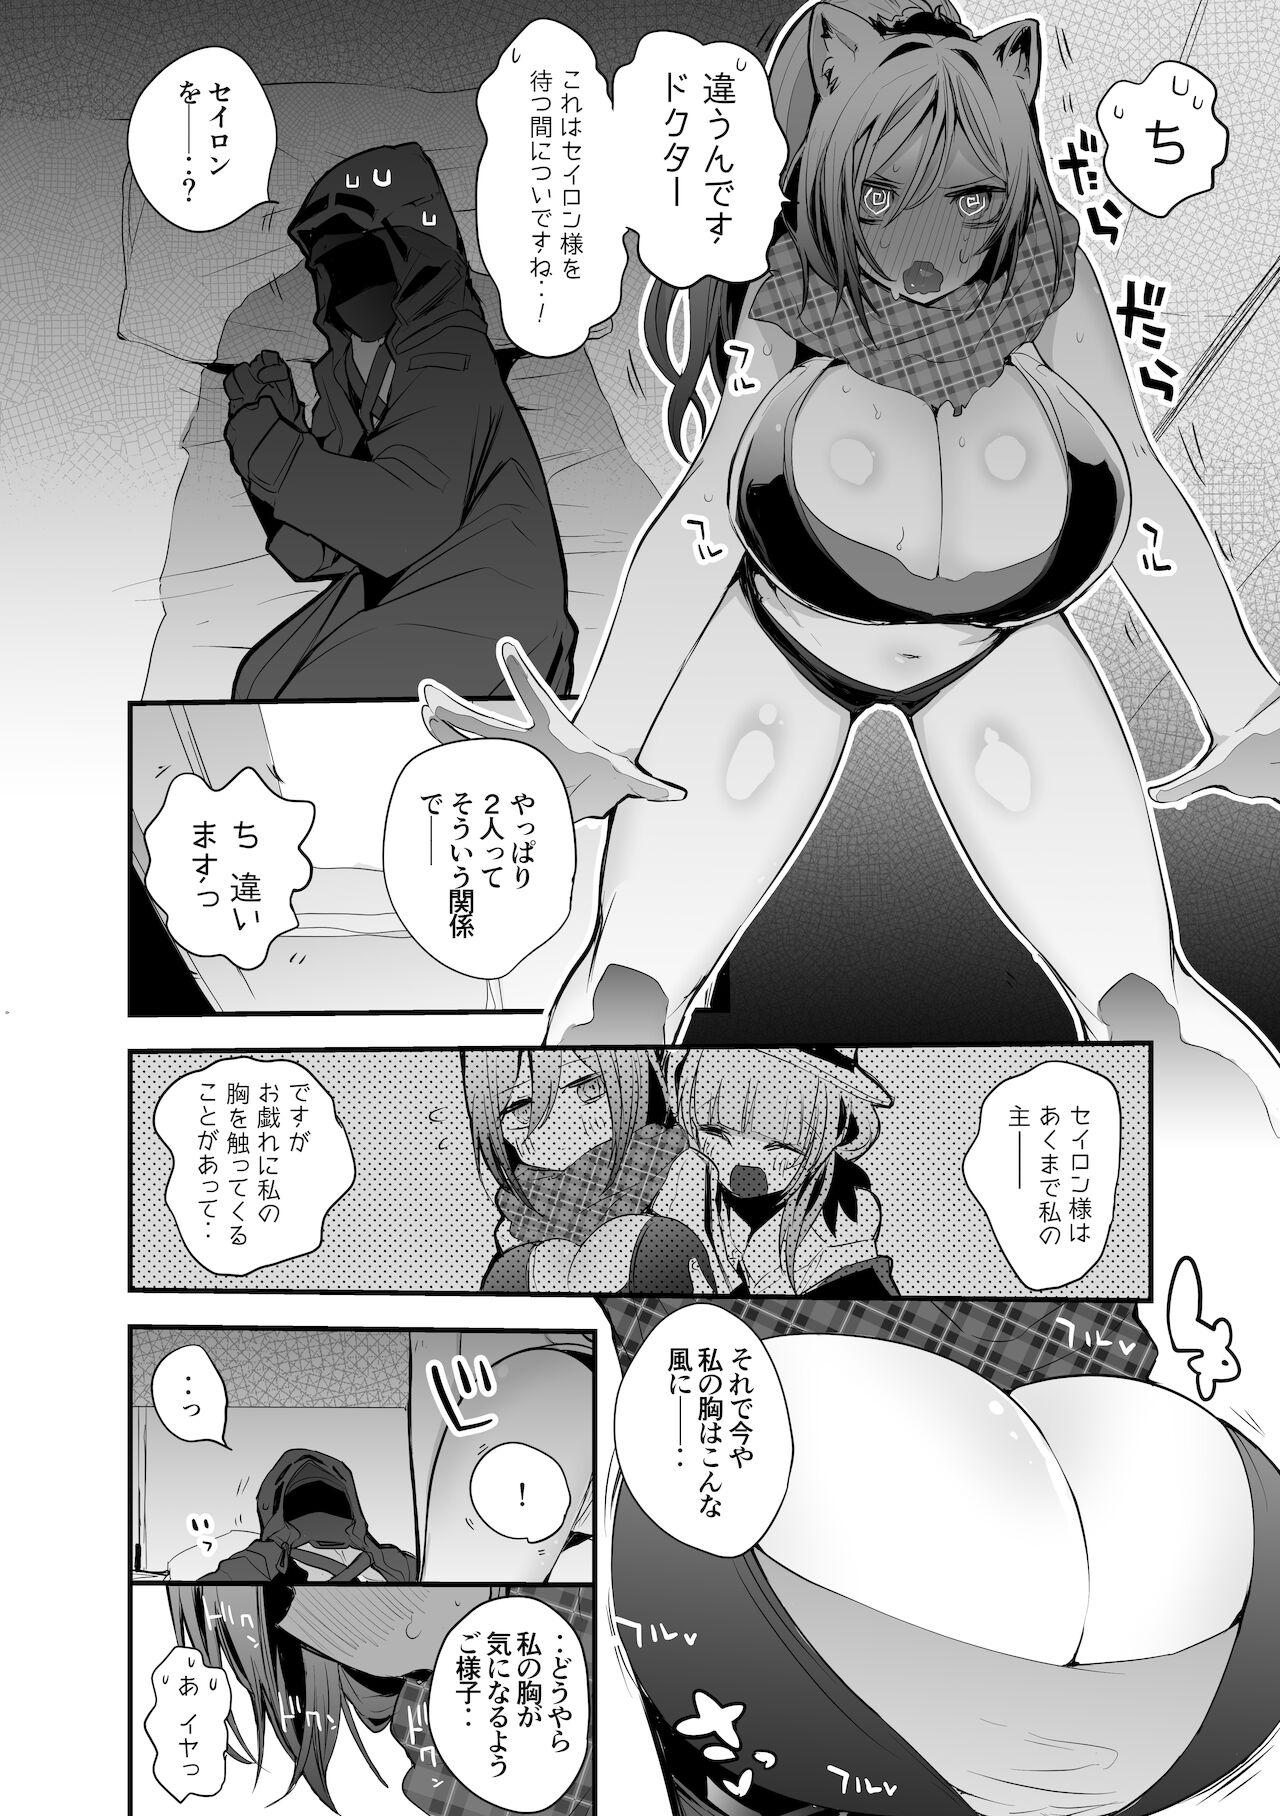 Anal Creampie シュヴァルツは押し倒す編 - Arknights Fake Tits - Page 3